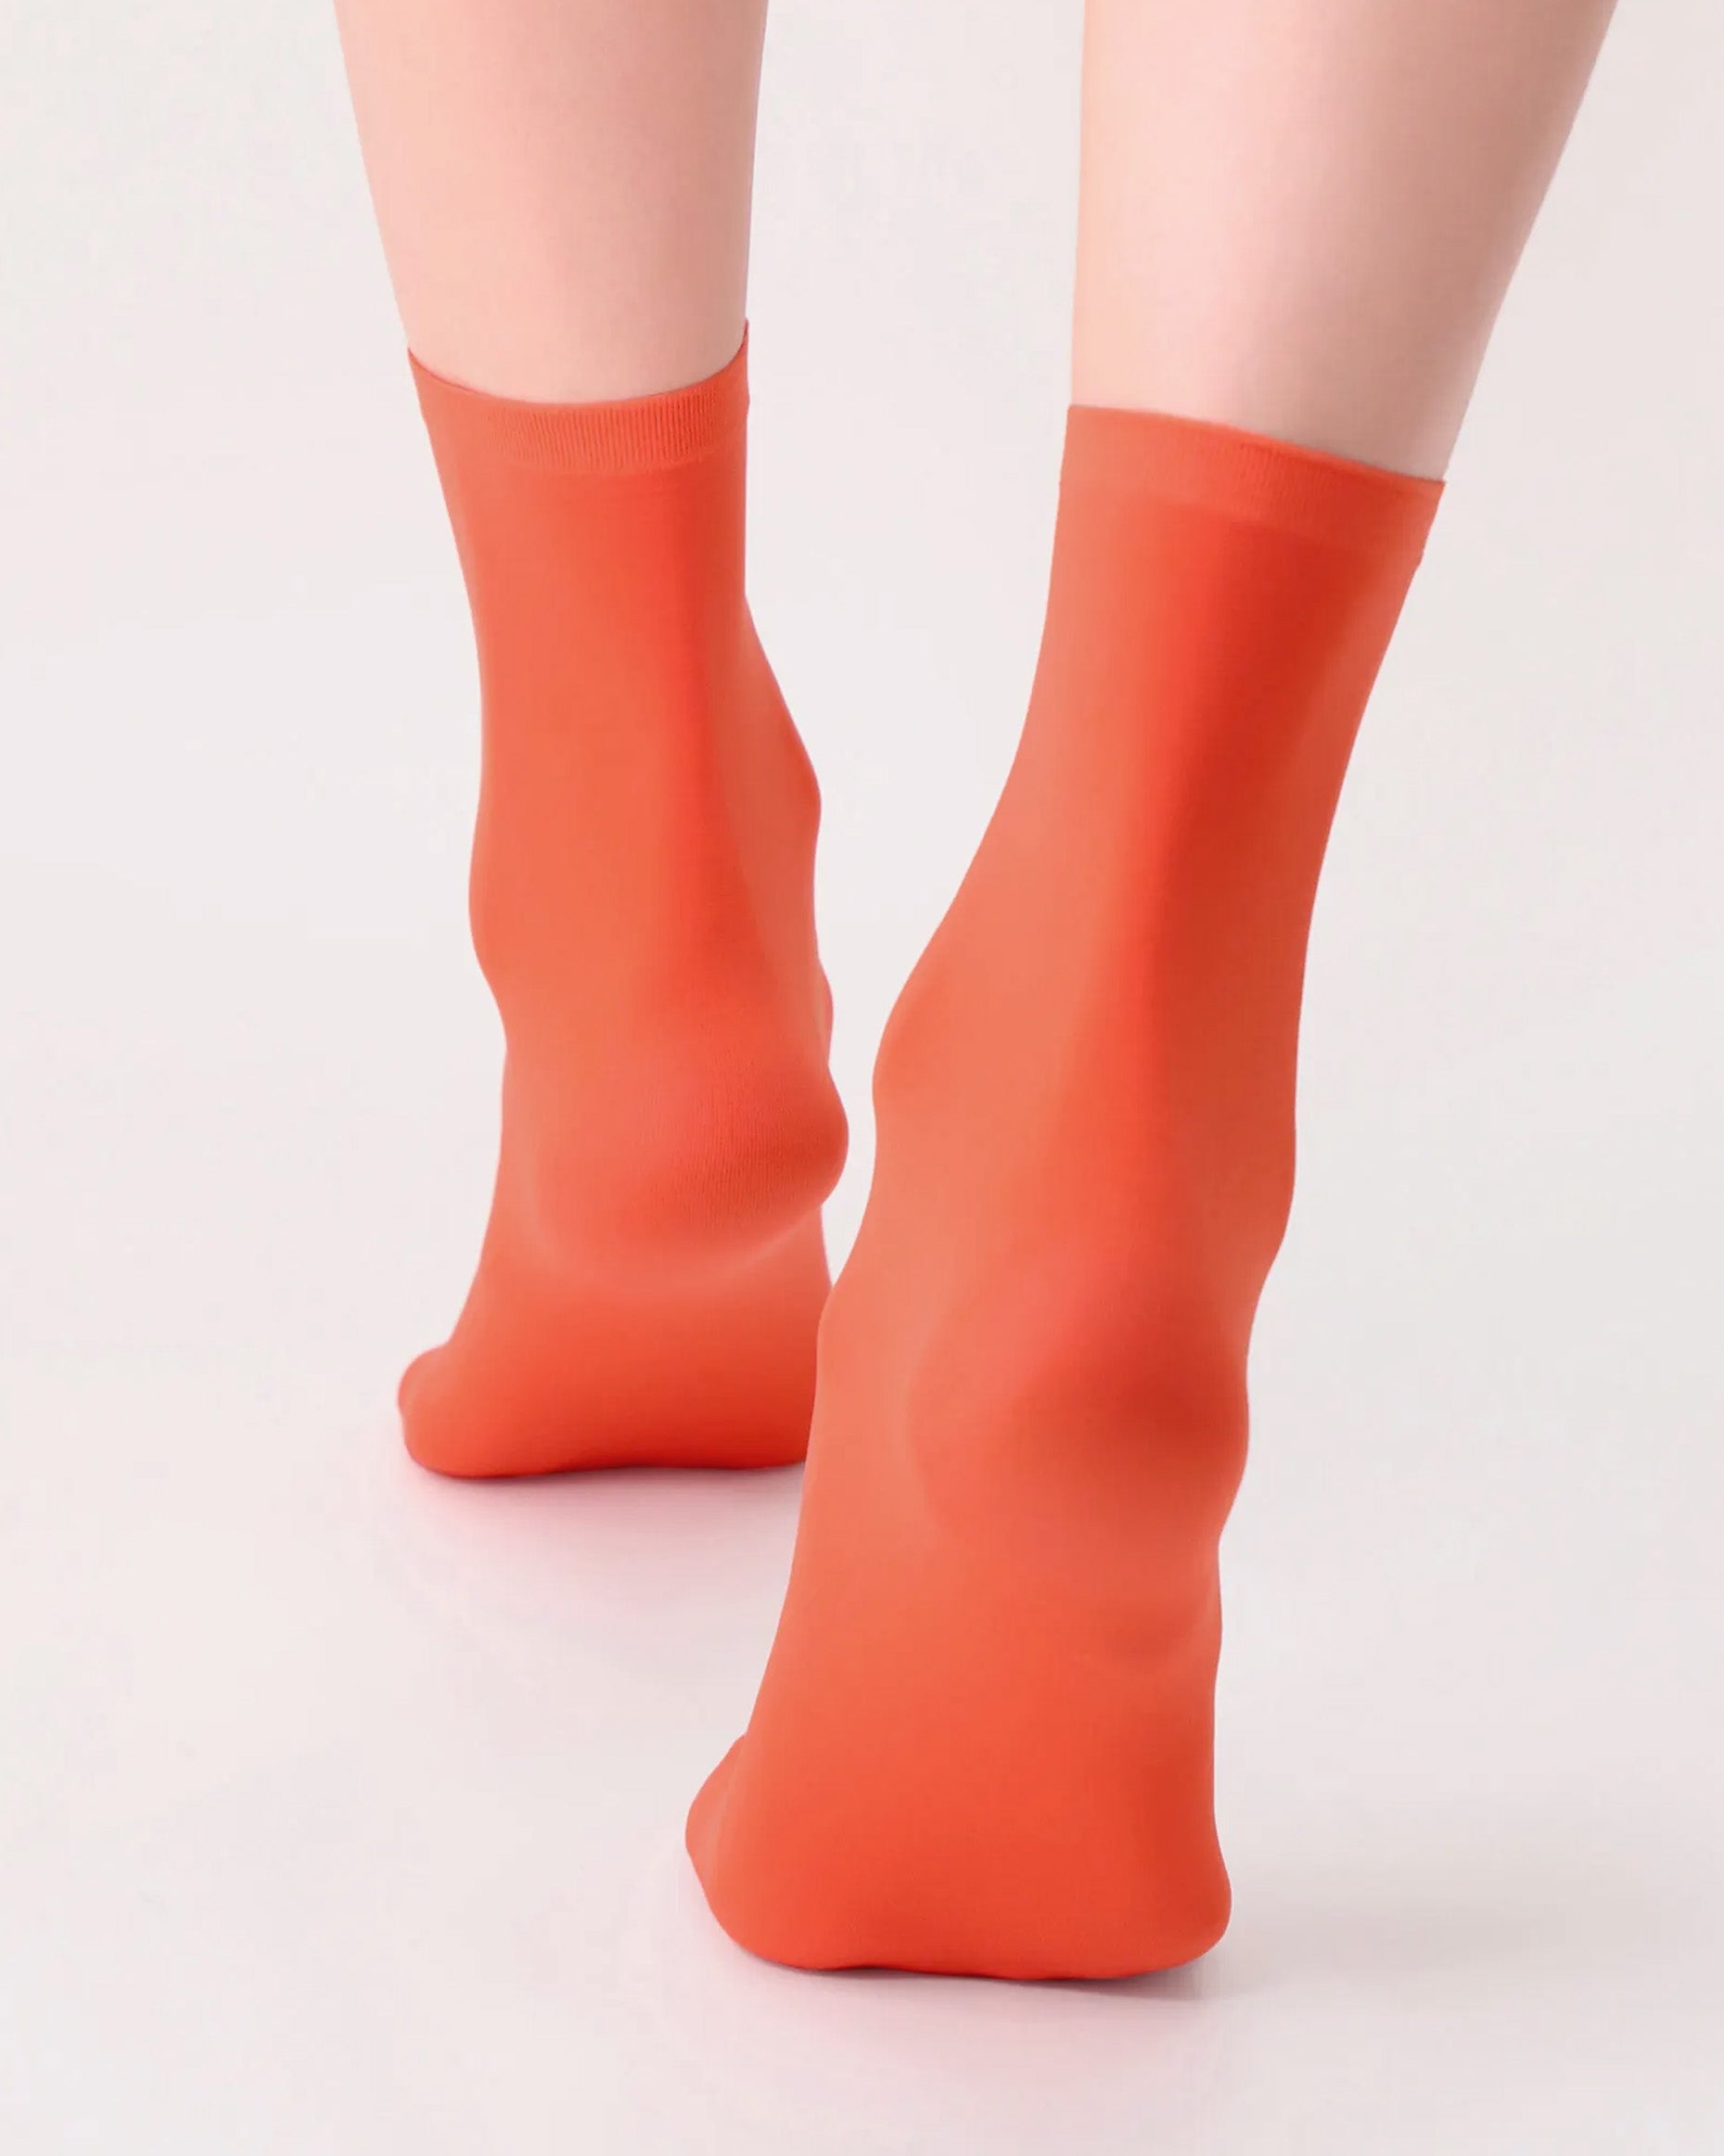 Oroblù All Colors Sock - Soft plain orange opaque ankle tube socks with plain cuff.